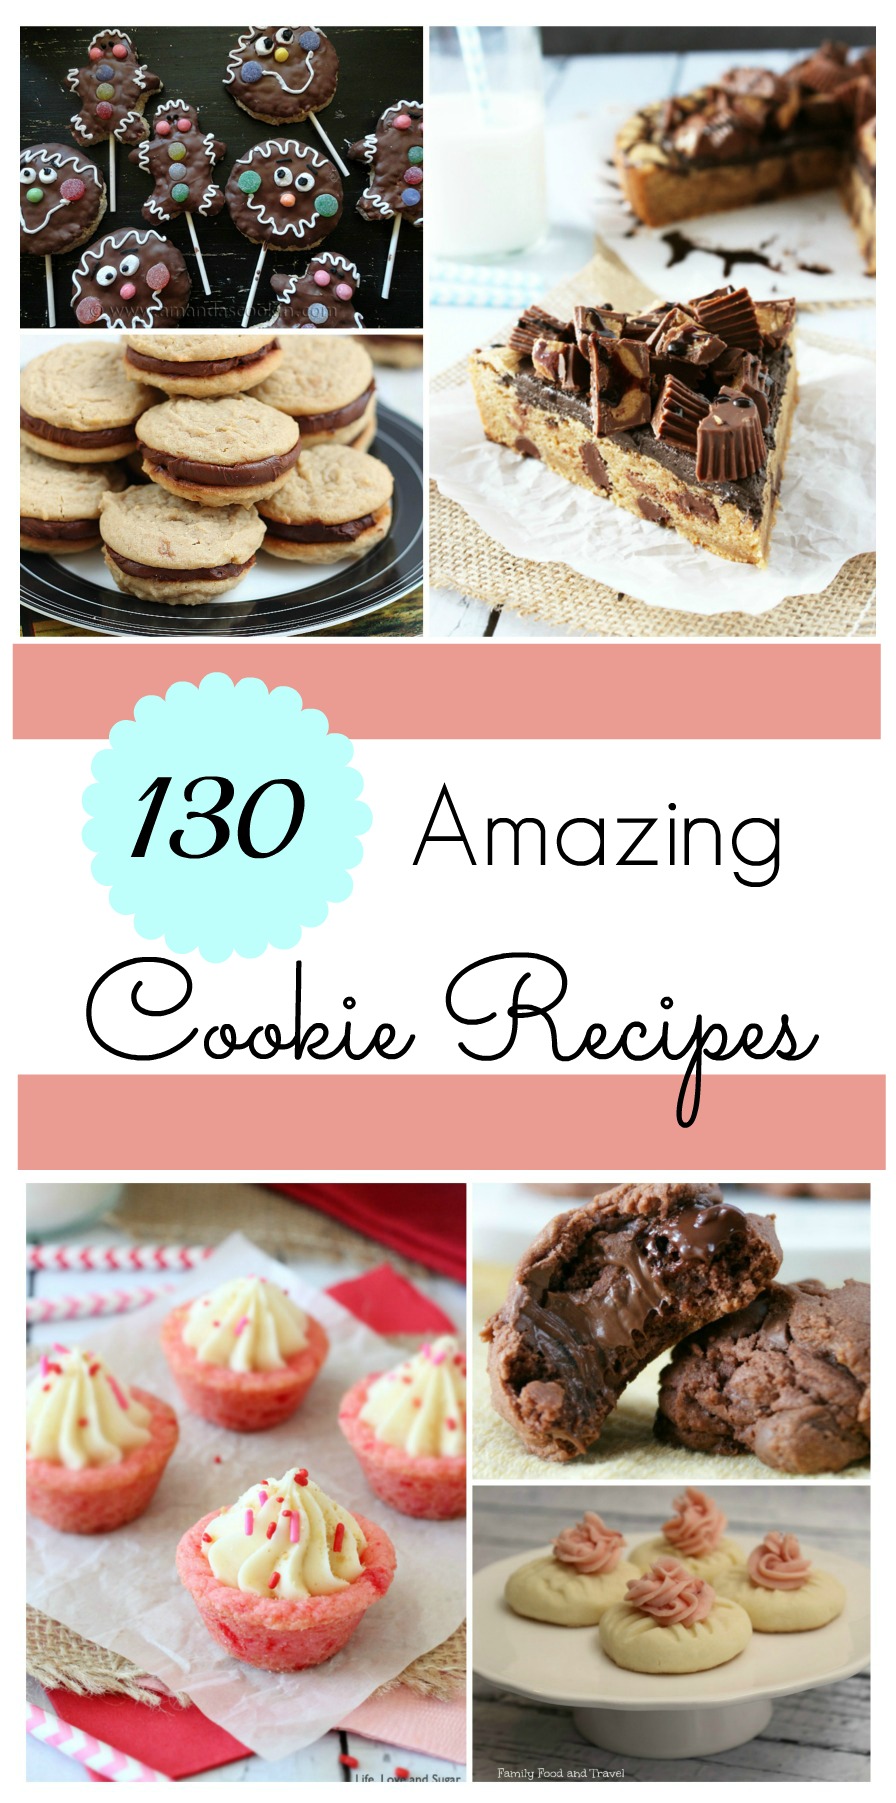 Looking for the perfect cookie recipe? Check out our list of 130 Amazing Cookie recipes (including pictures) here!